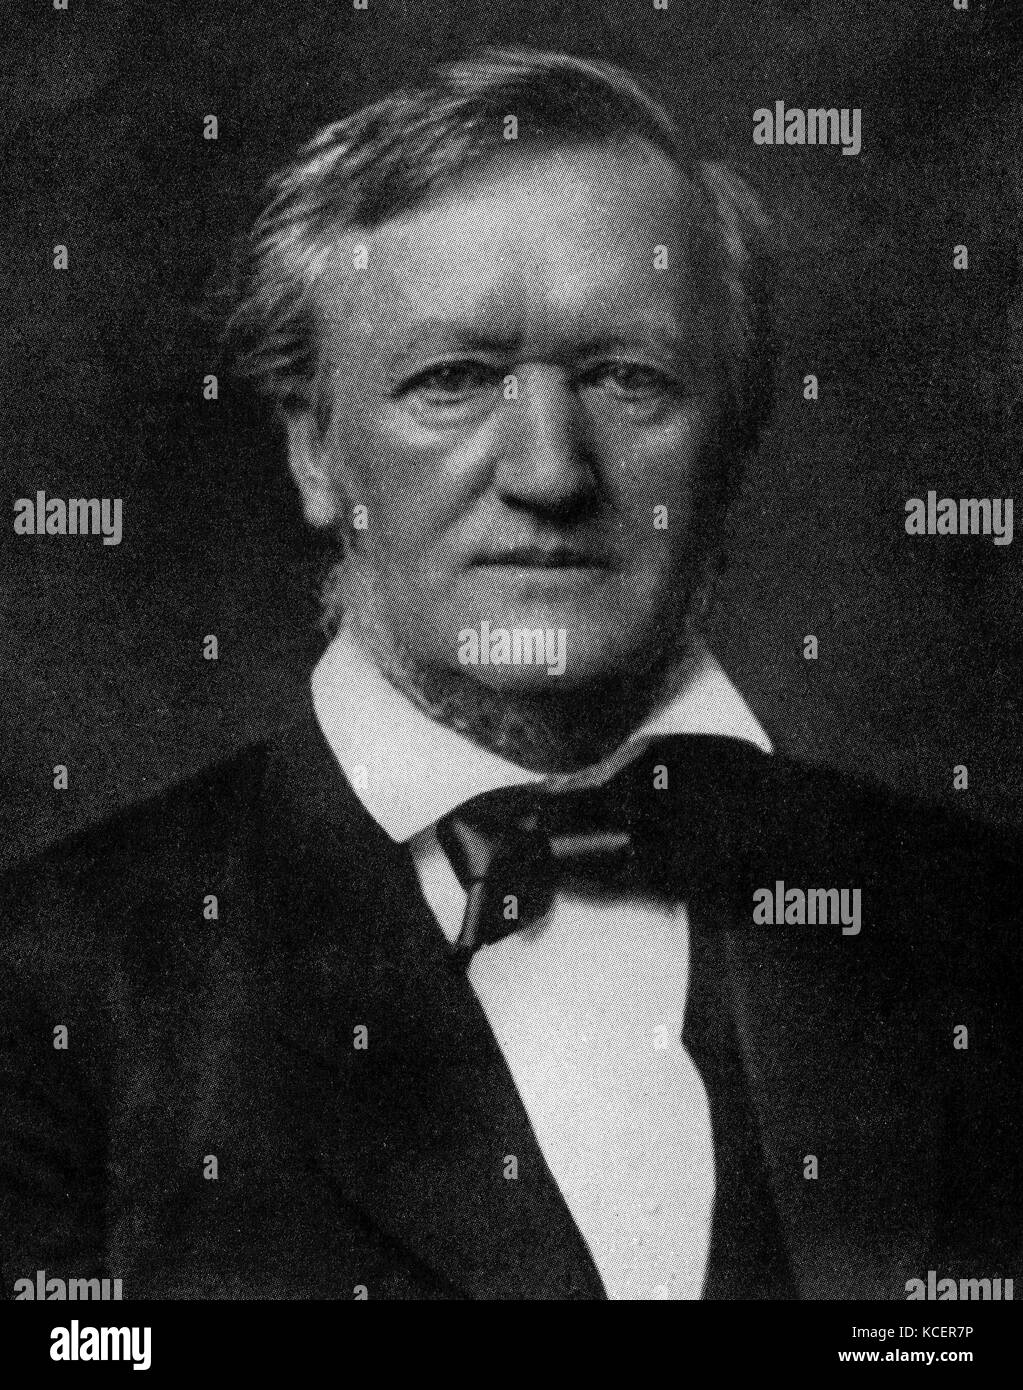 Photograph of Wilhelm Richard Wagner (1813-1883) a German composer. Dated 19th Century Stock Photo